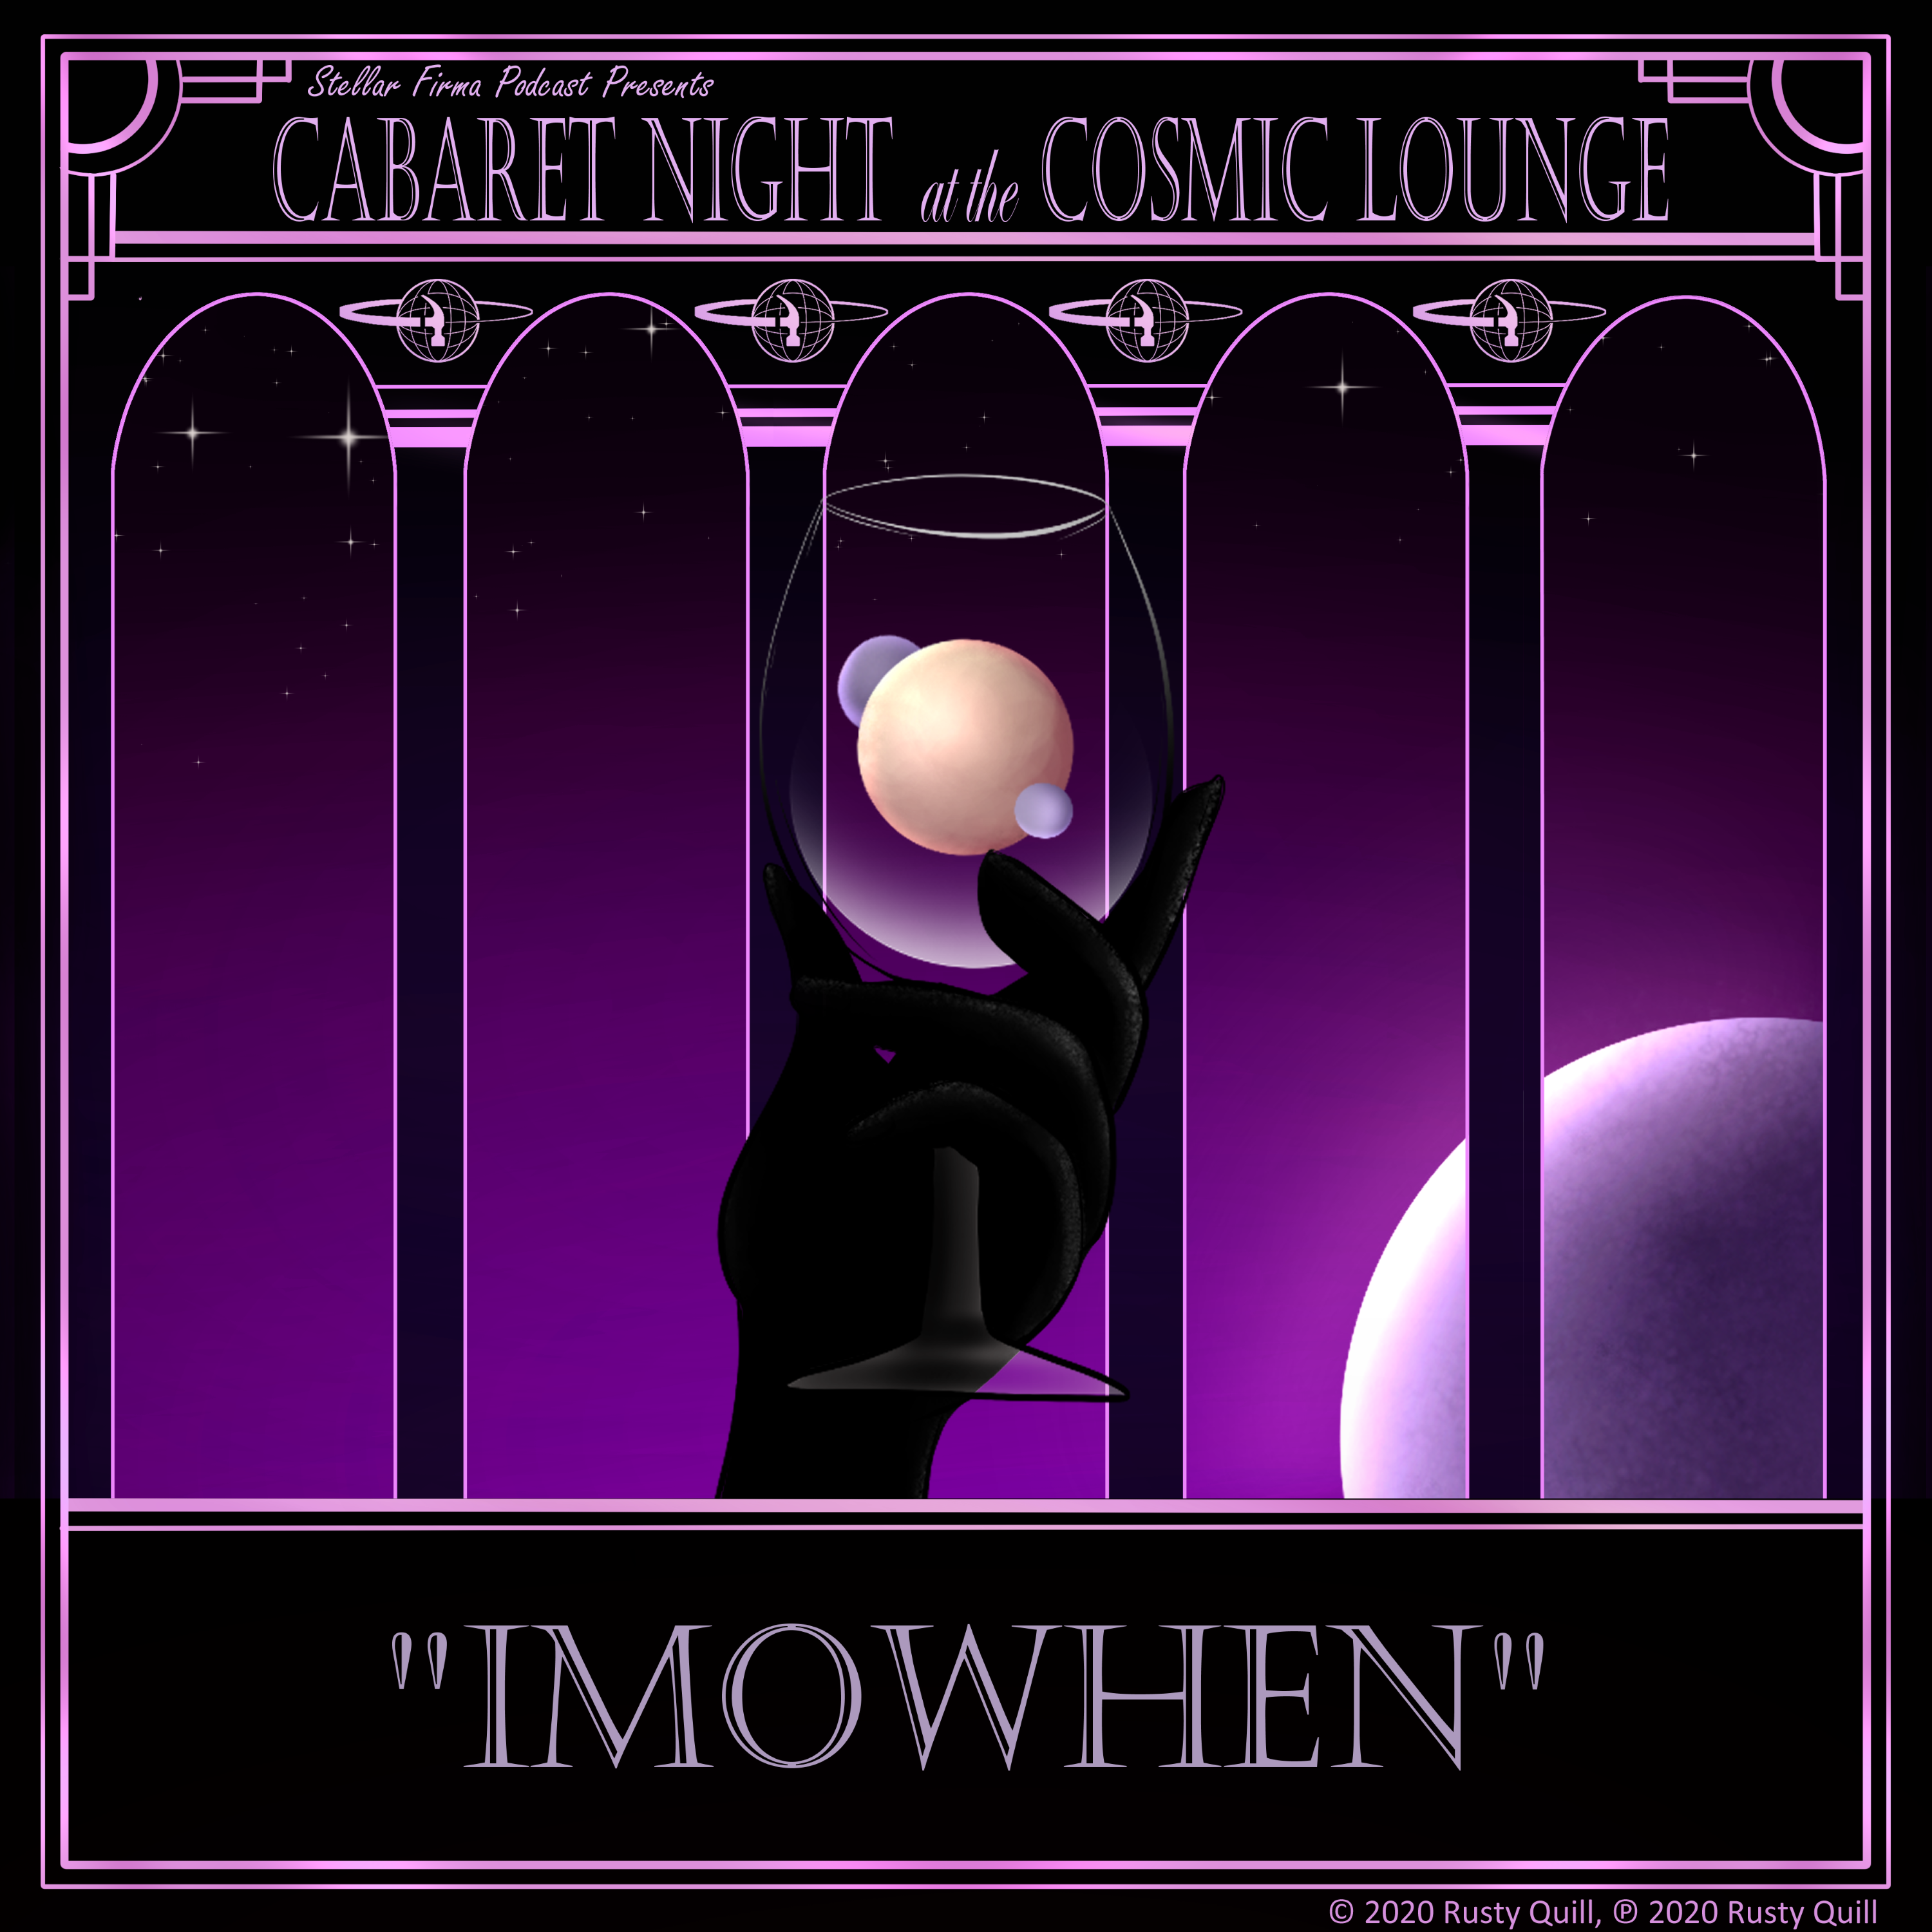 Cabaret Night at the Cosmic Lounge: IMOWHEN